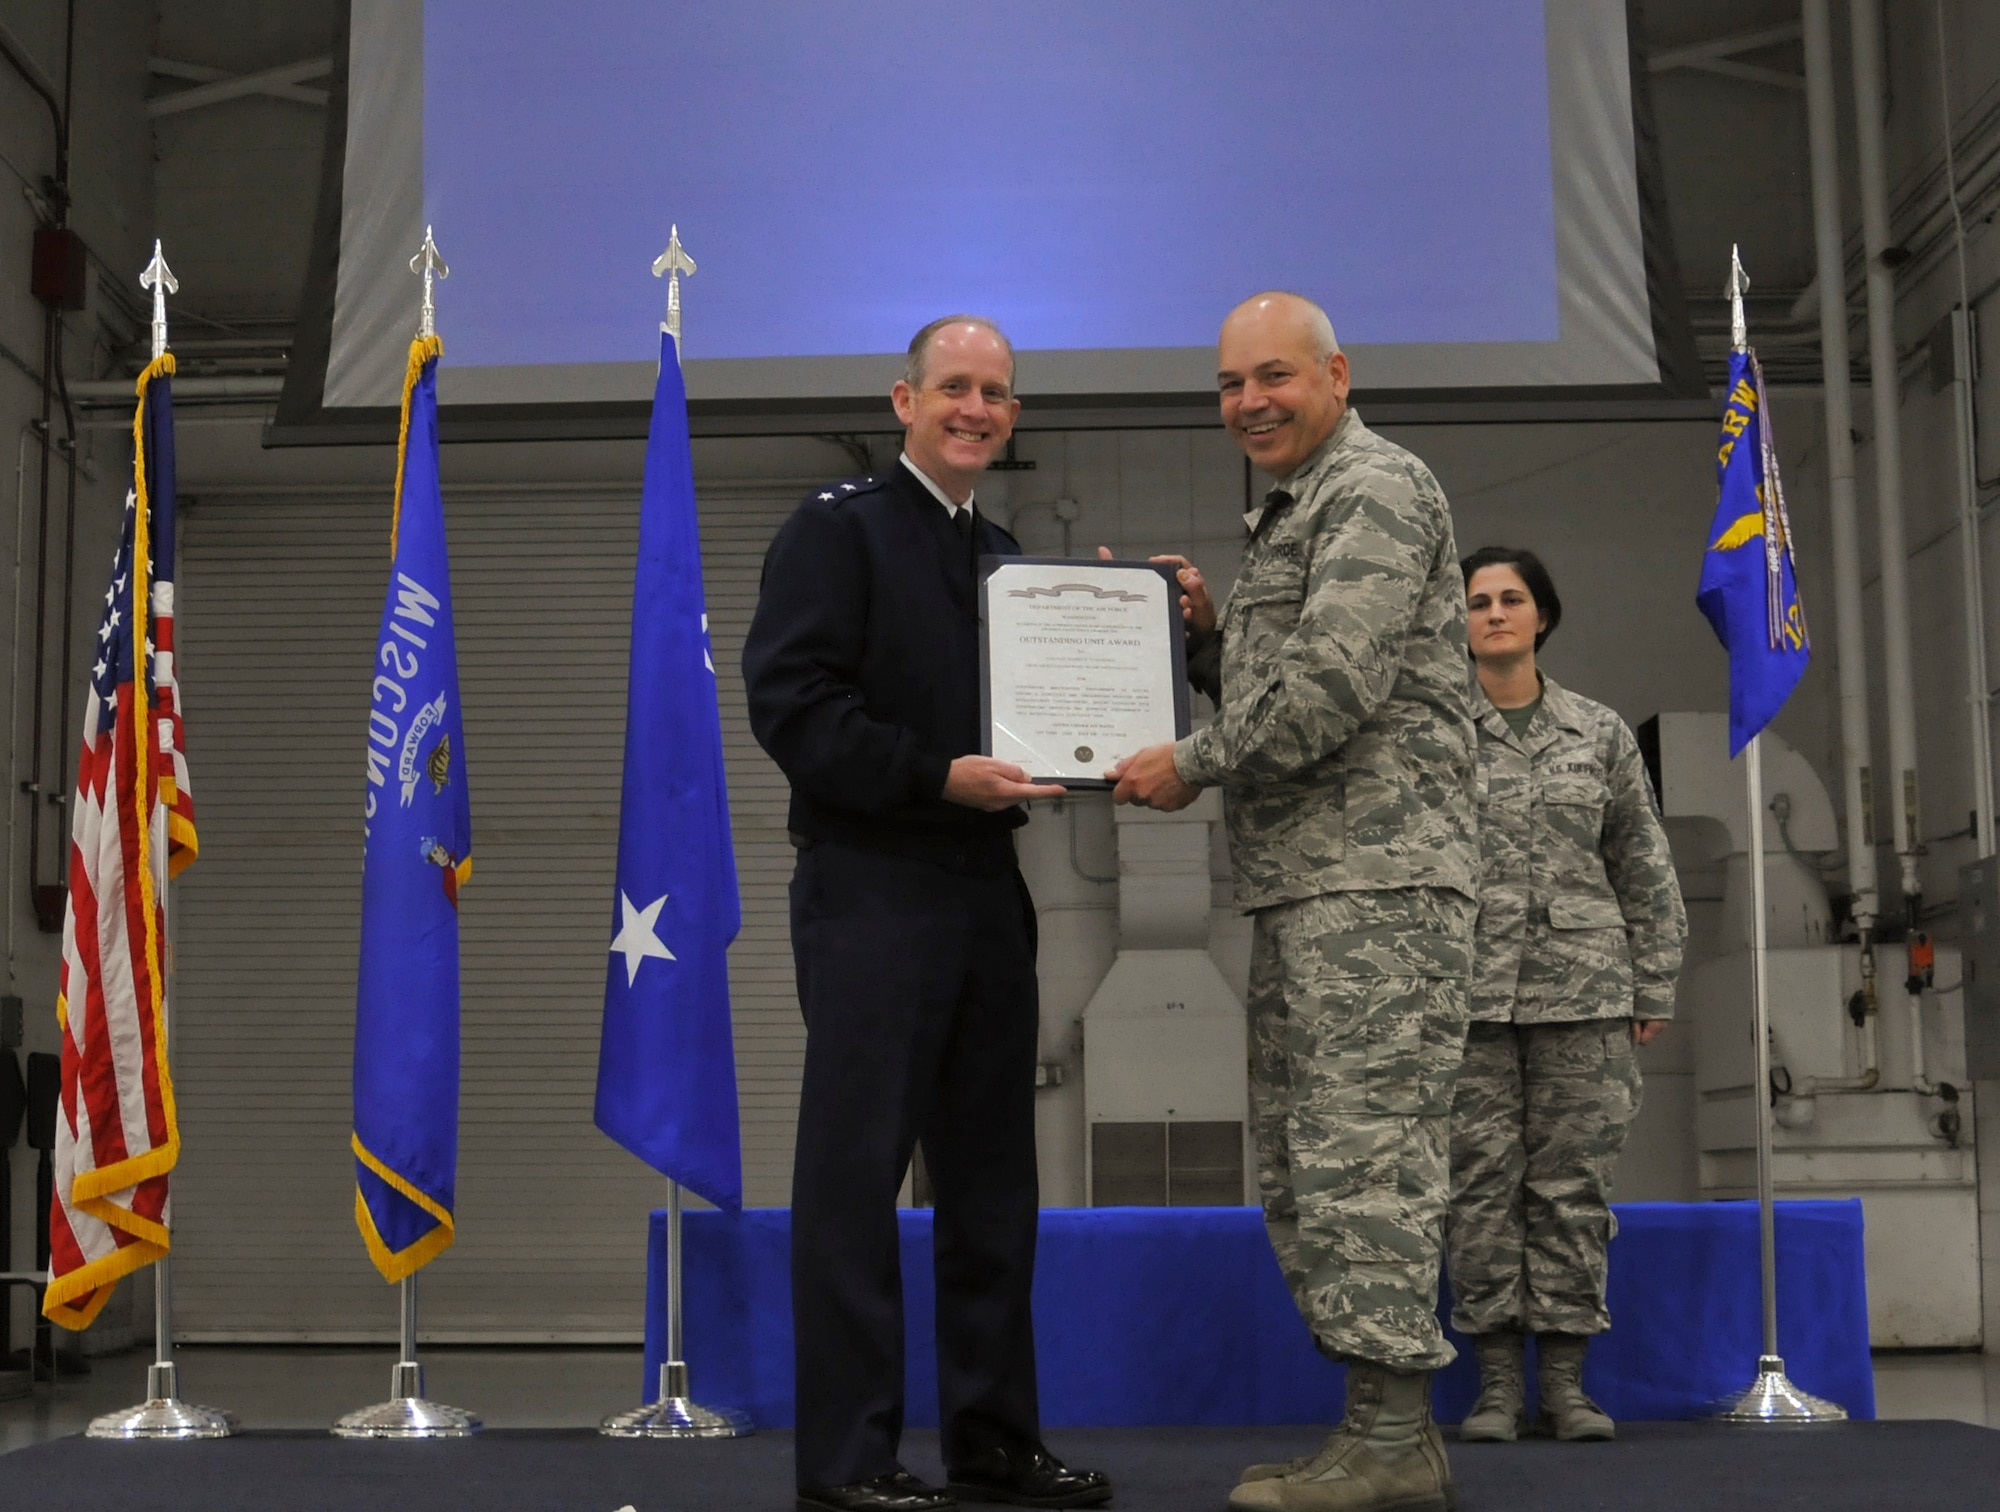 Major General Donald P. Dunbar (left), Adjutant General of the Wisconsin National Guard, presents the Air Force Outstanding Unit Award to Col. Daniel Yenchesky, commander of the 128th Air Refueling Wing, in a formal ceremony Oct. 2, 2016 at General Mitchell Airfield, Milwaukee. This award marks the seventh time the 128 ARW has received the AFOUA in recognition of distinguished meritorious service from Oct. 1, 2014 through Sept. 30, 2015. (Air National Guard photo by Senior Airman Morgan R. Lipinski, 128 ARW Public Affairs/Released) 